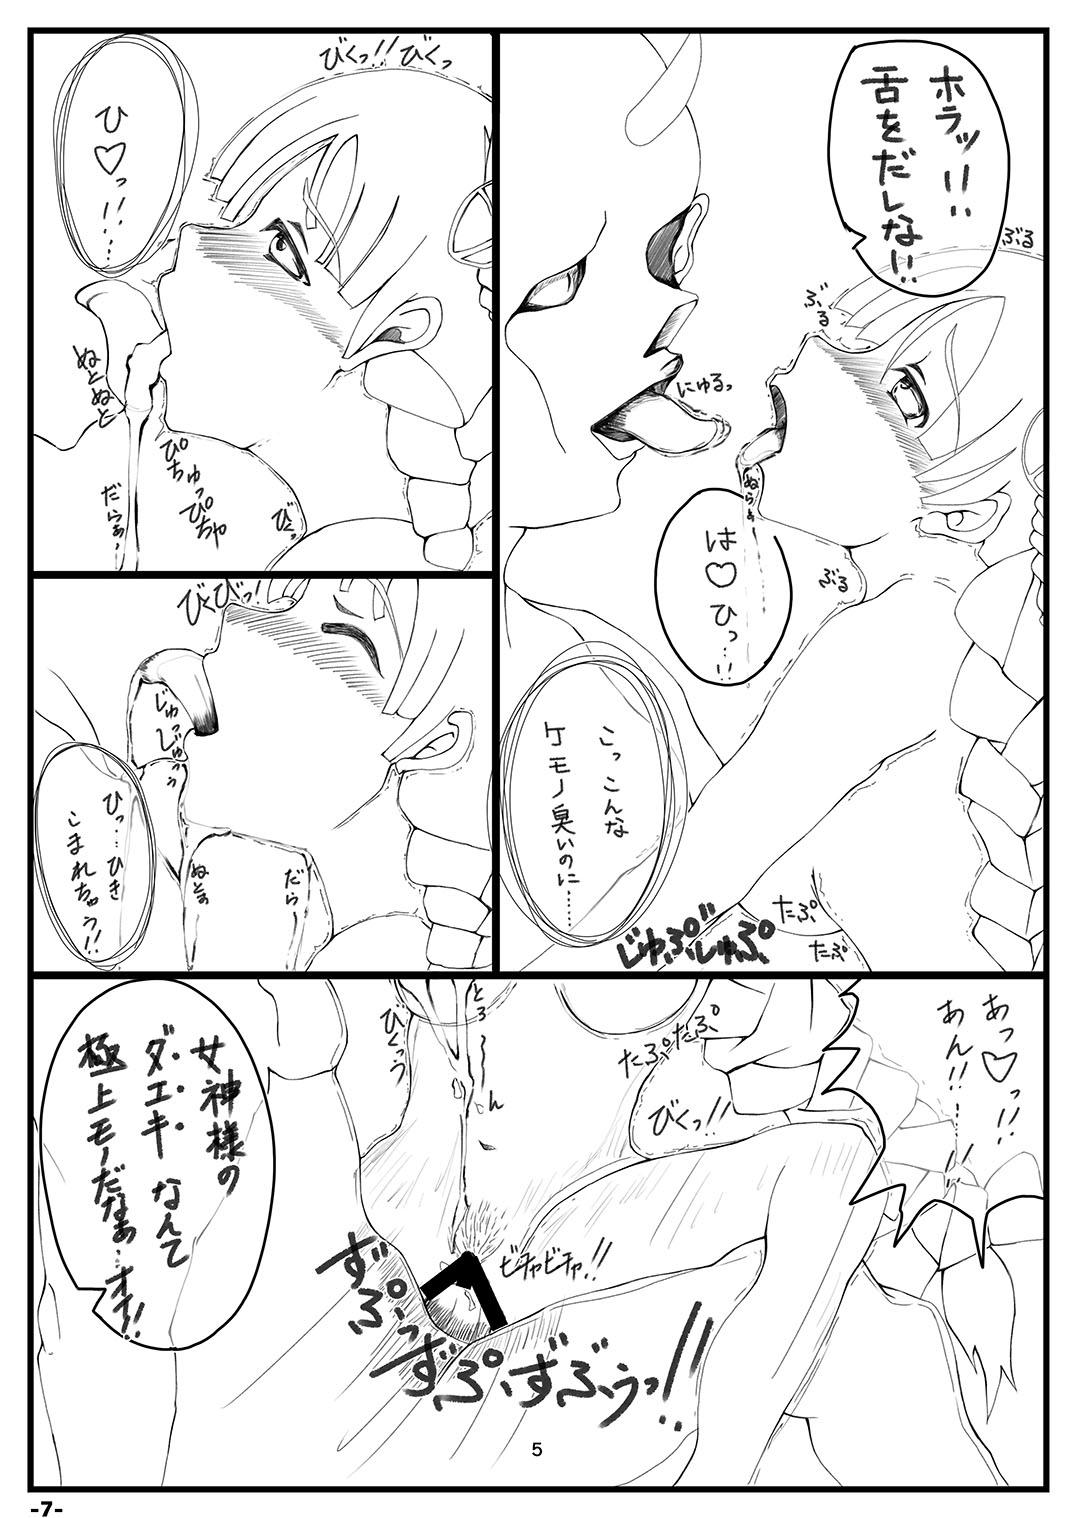 Exposed Yamiochi - Puzzle and dragons Nipple - Page 5